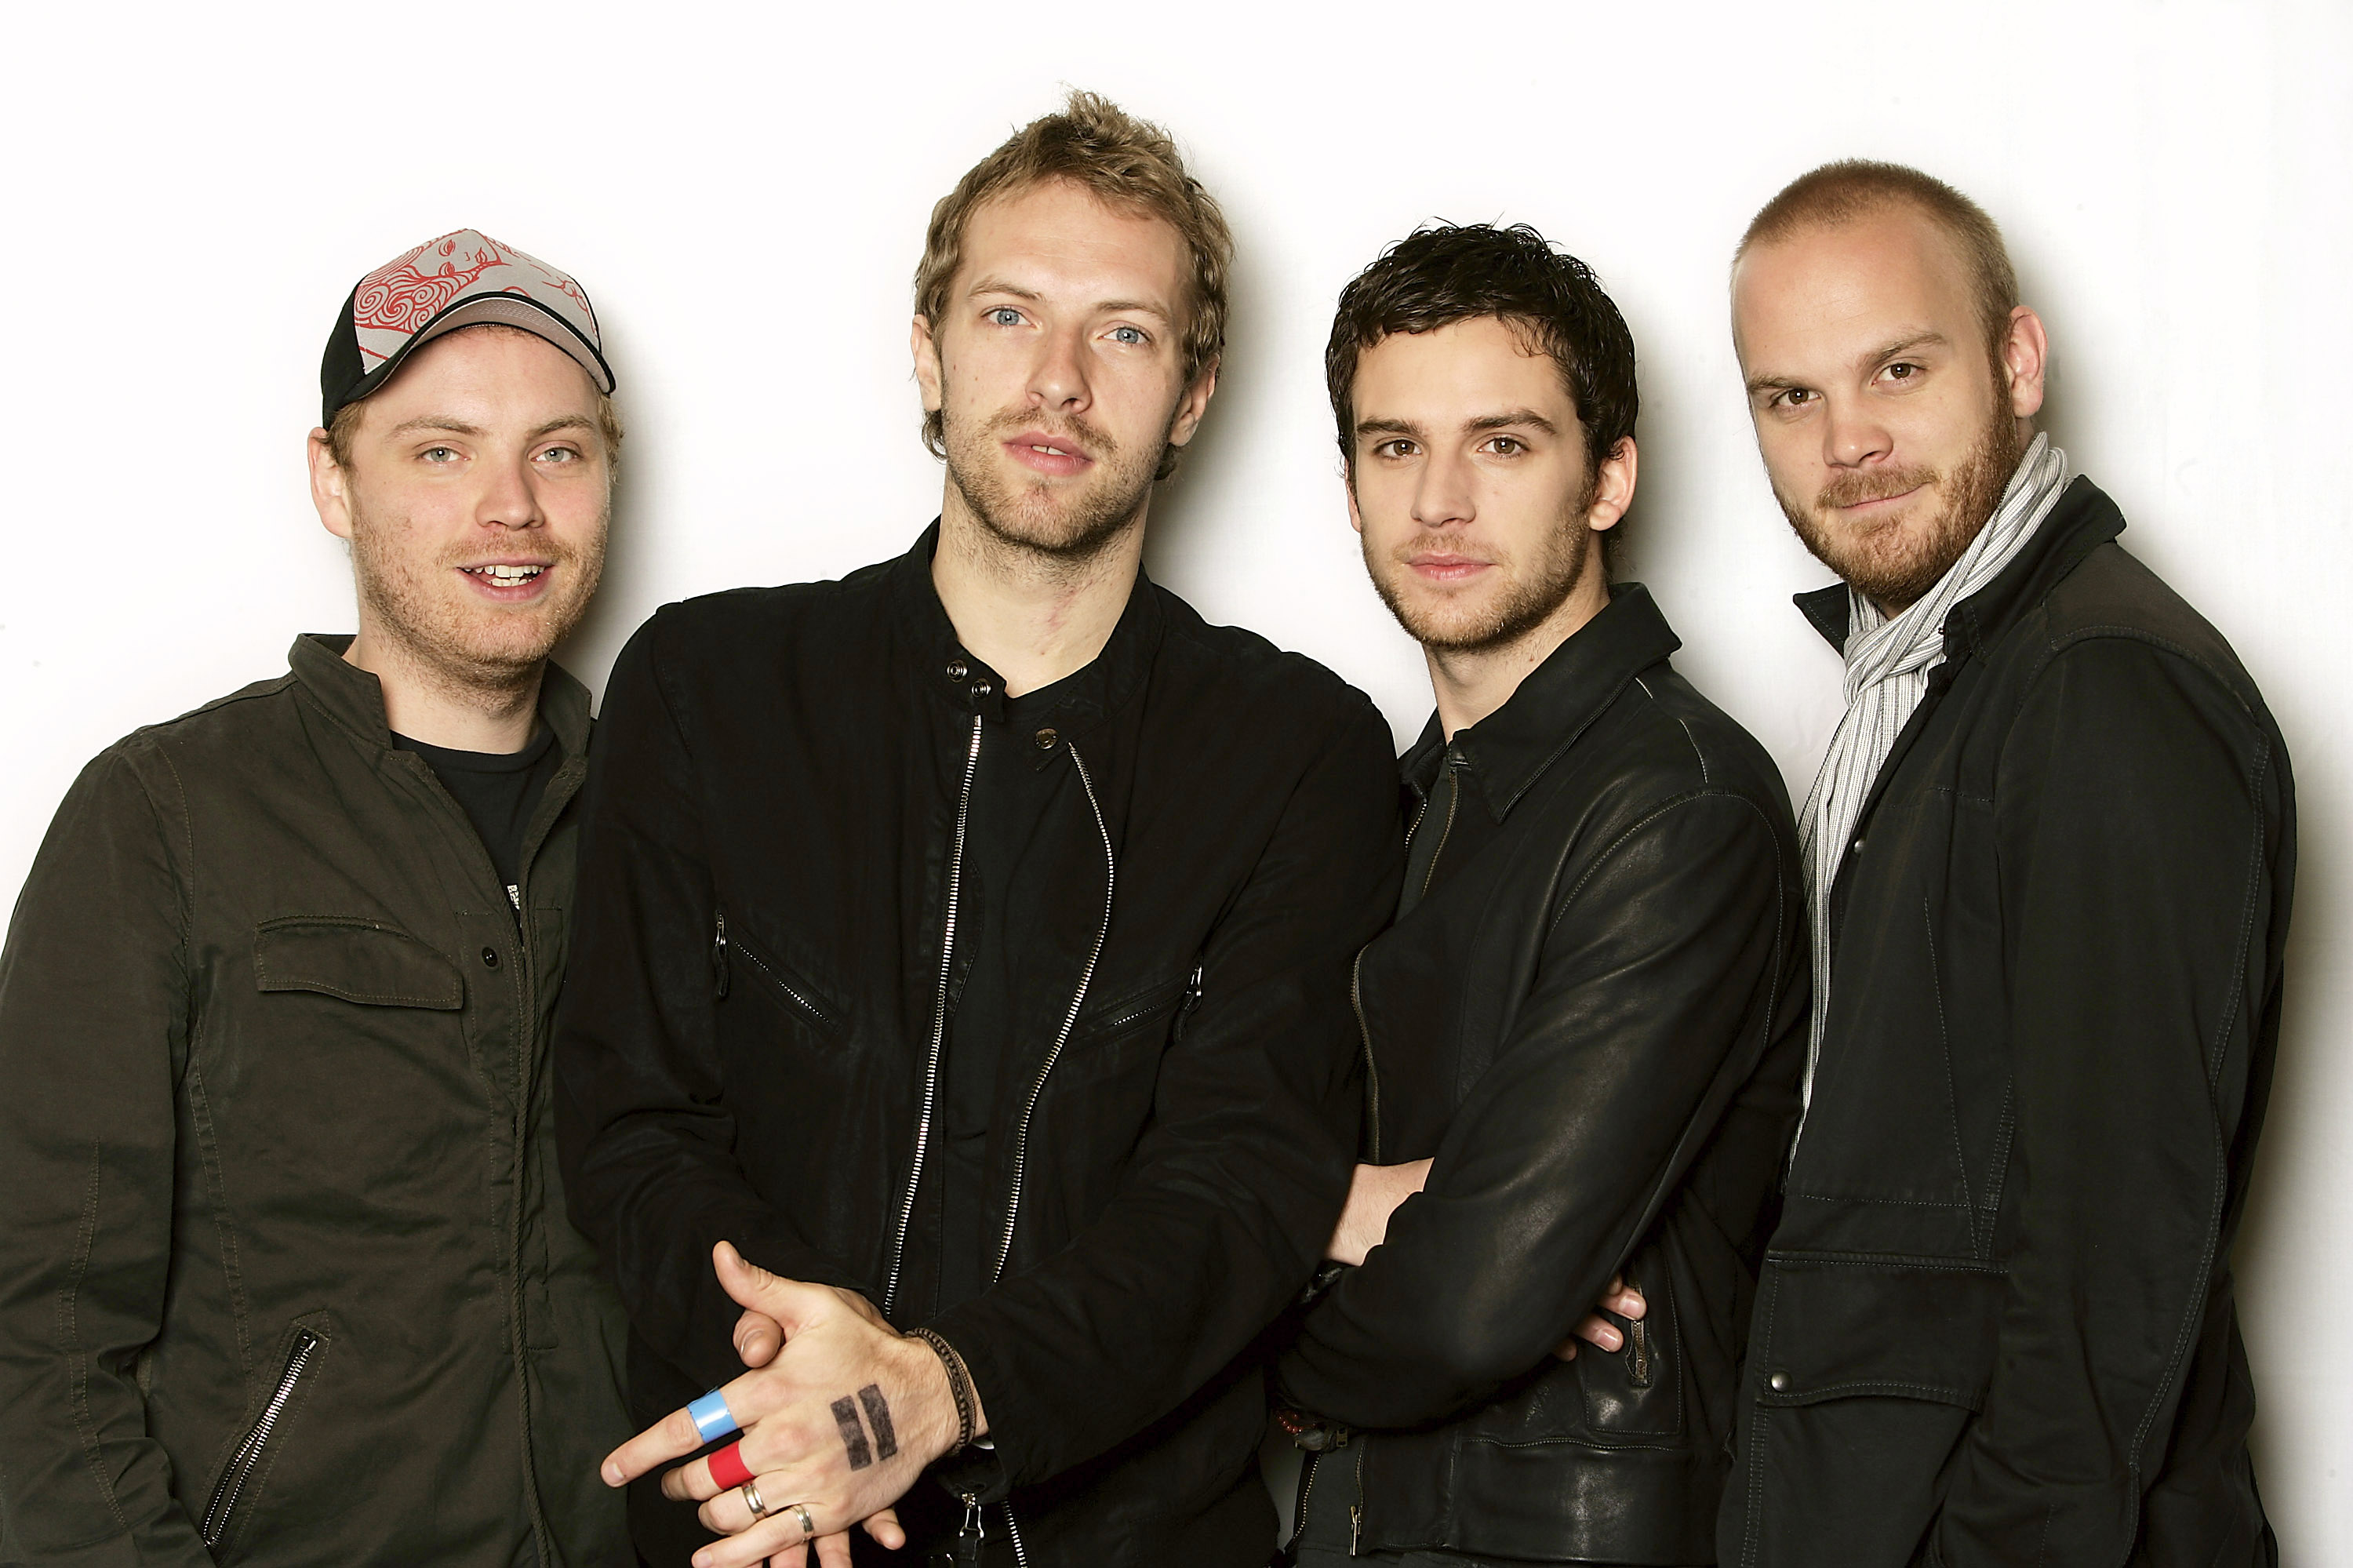 HD wallpaper featuring a group of four men posing together against a plain background, evocative of the band tagged in the image.